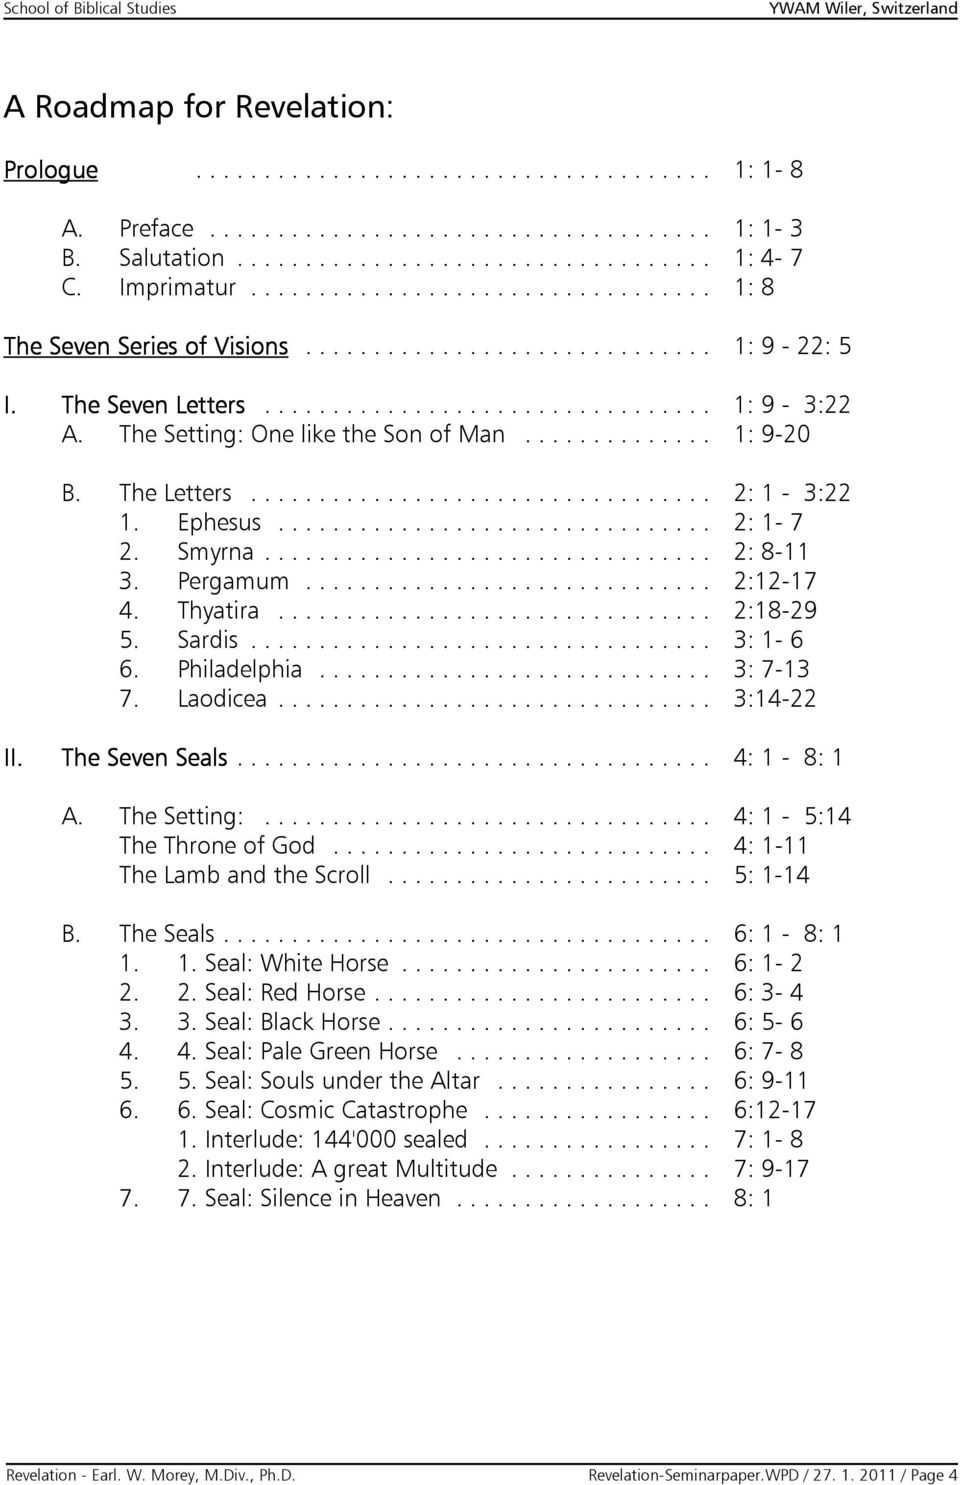 The Setting: One like the Son of Man.............. 1: 9-20 B. The Letters.................................. 2: 1-3:22 1. Ephesus................................ 2: 1-7 2. Smyrna................................. 2: 8-11 3.